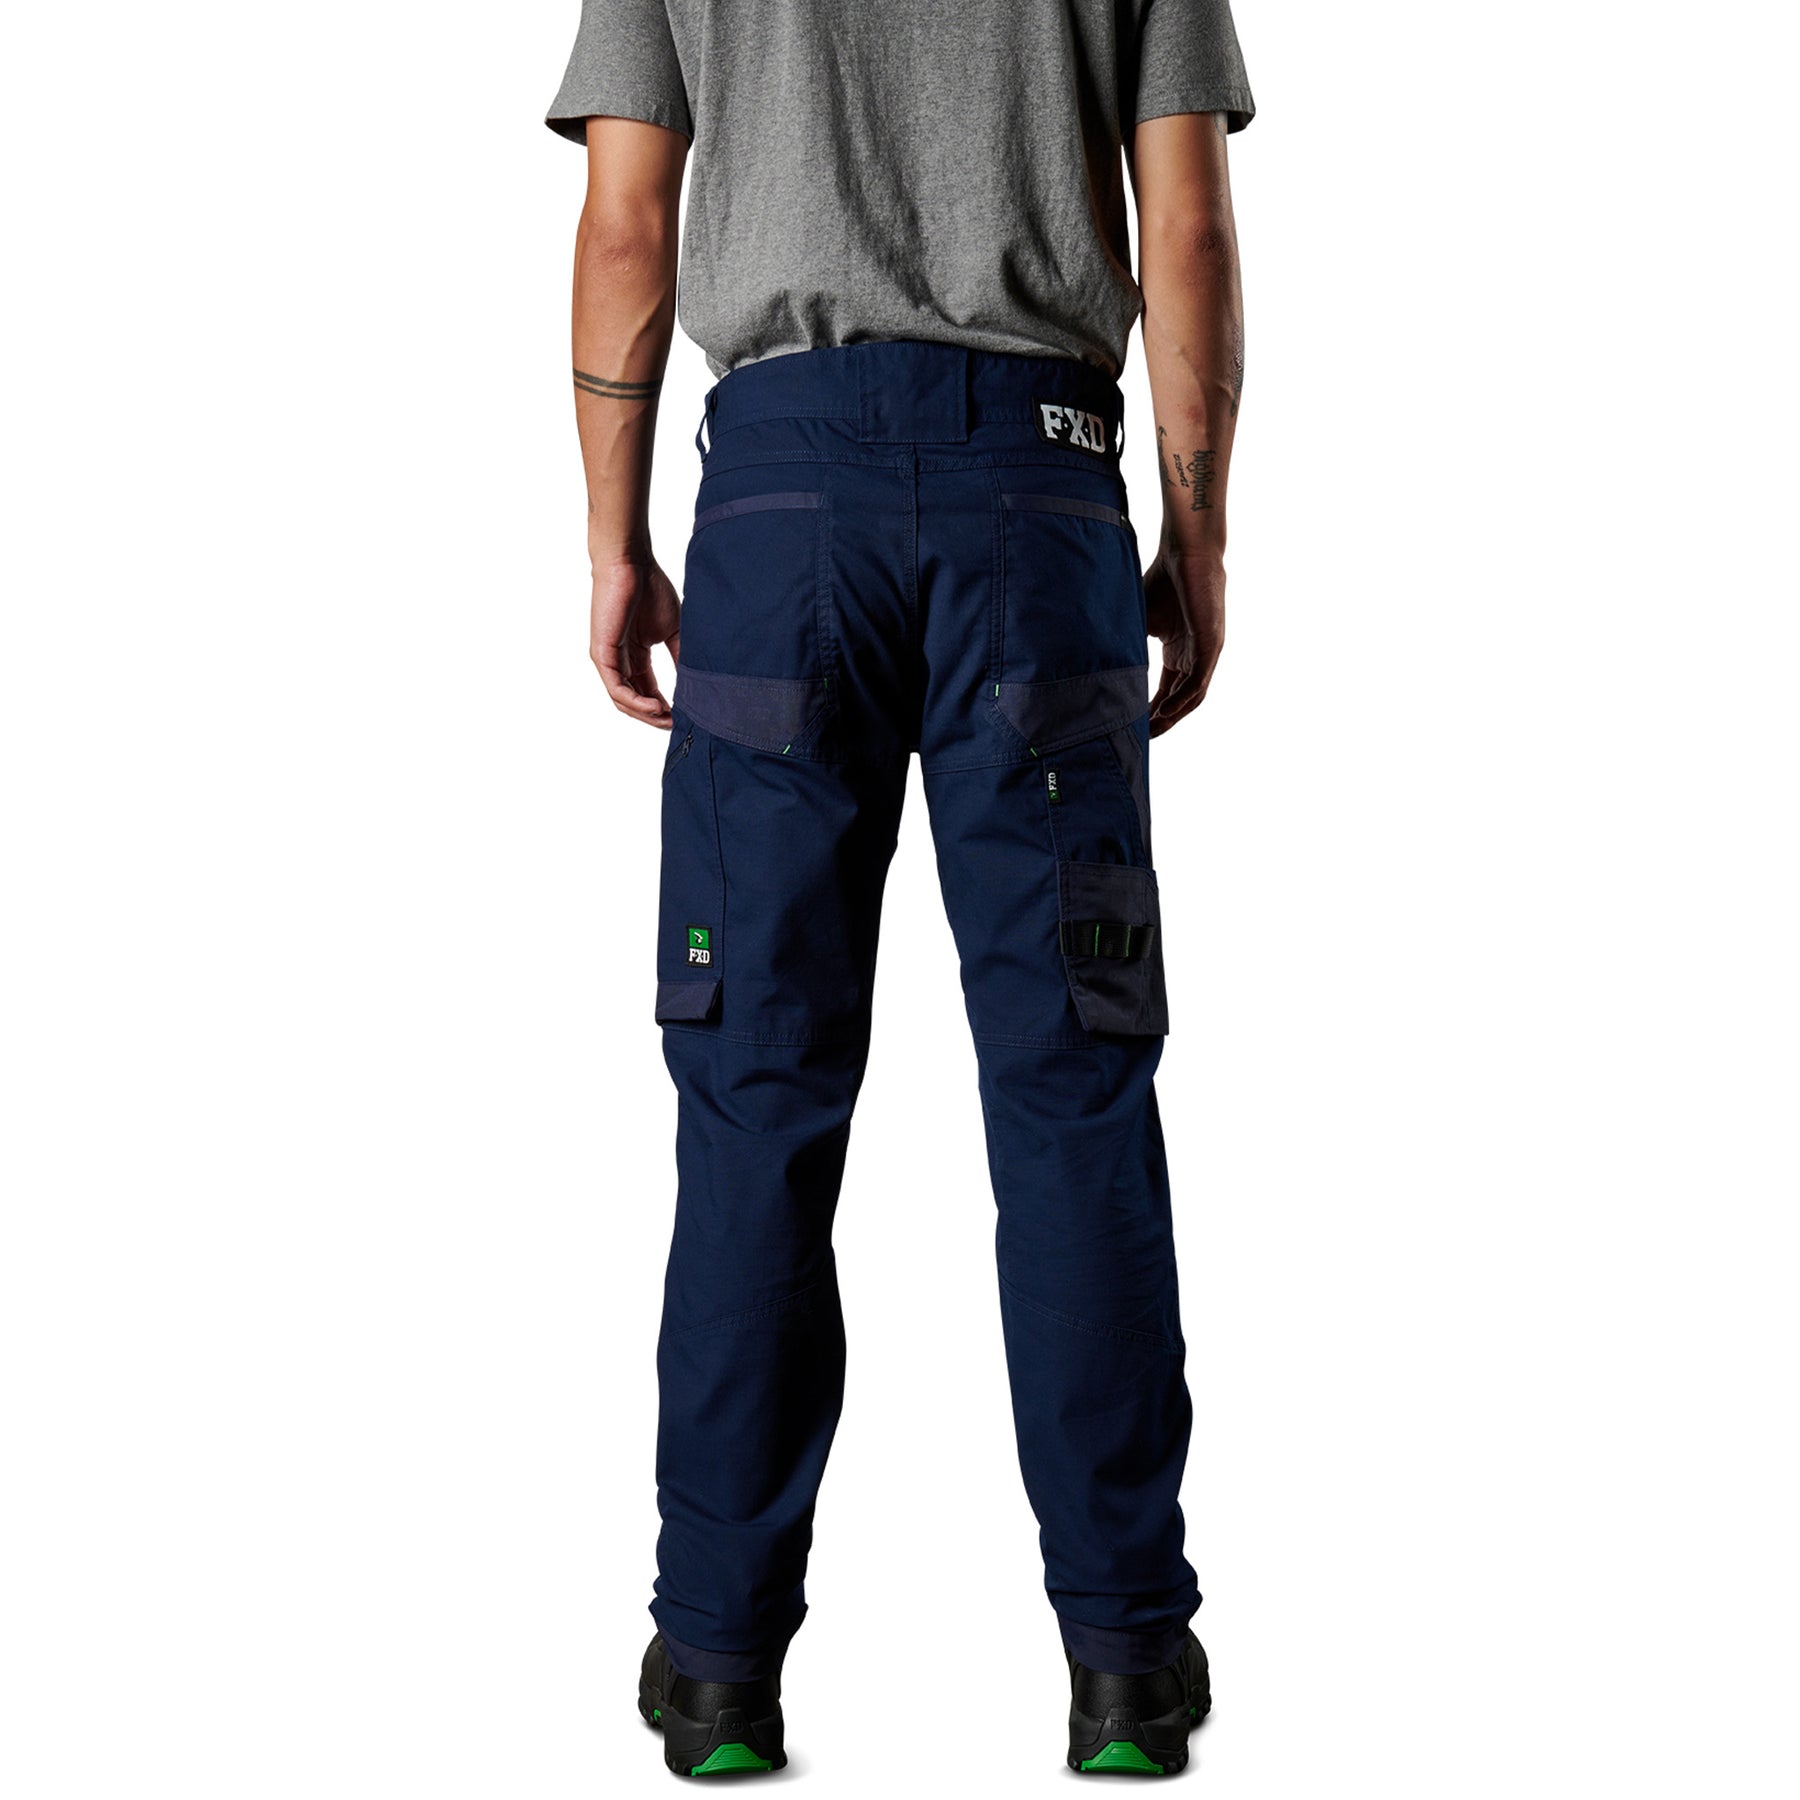 fxd stretch ripstop work pant in navy